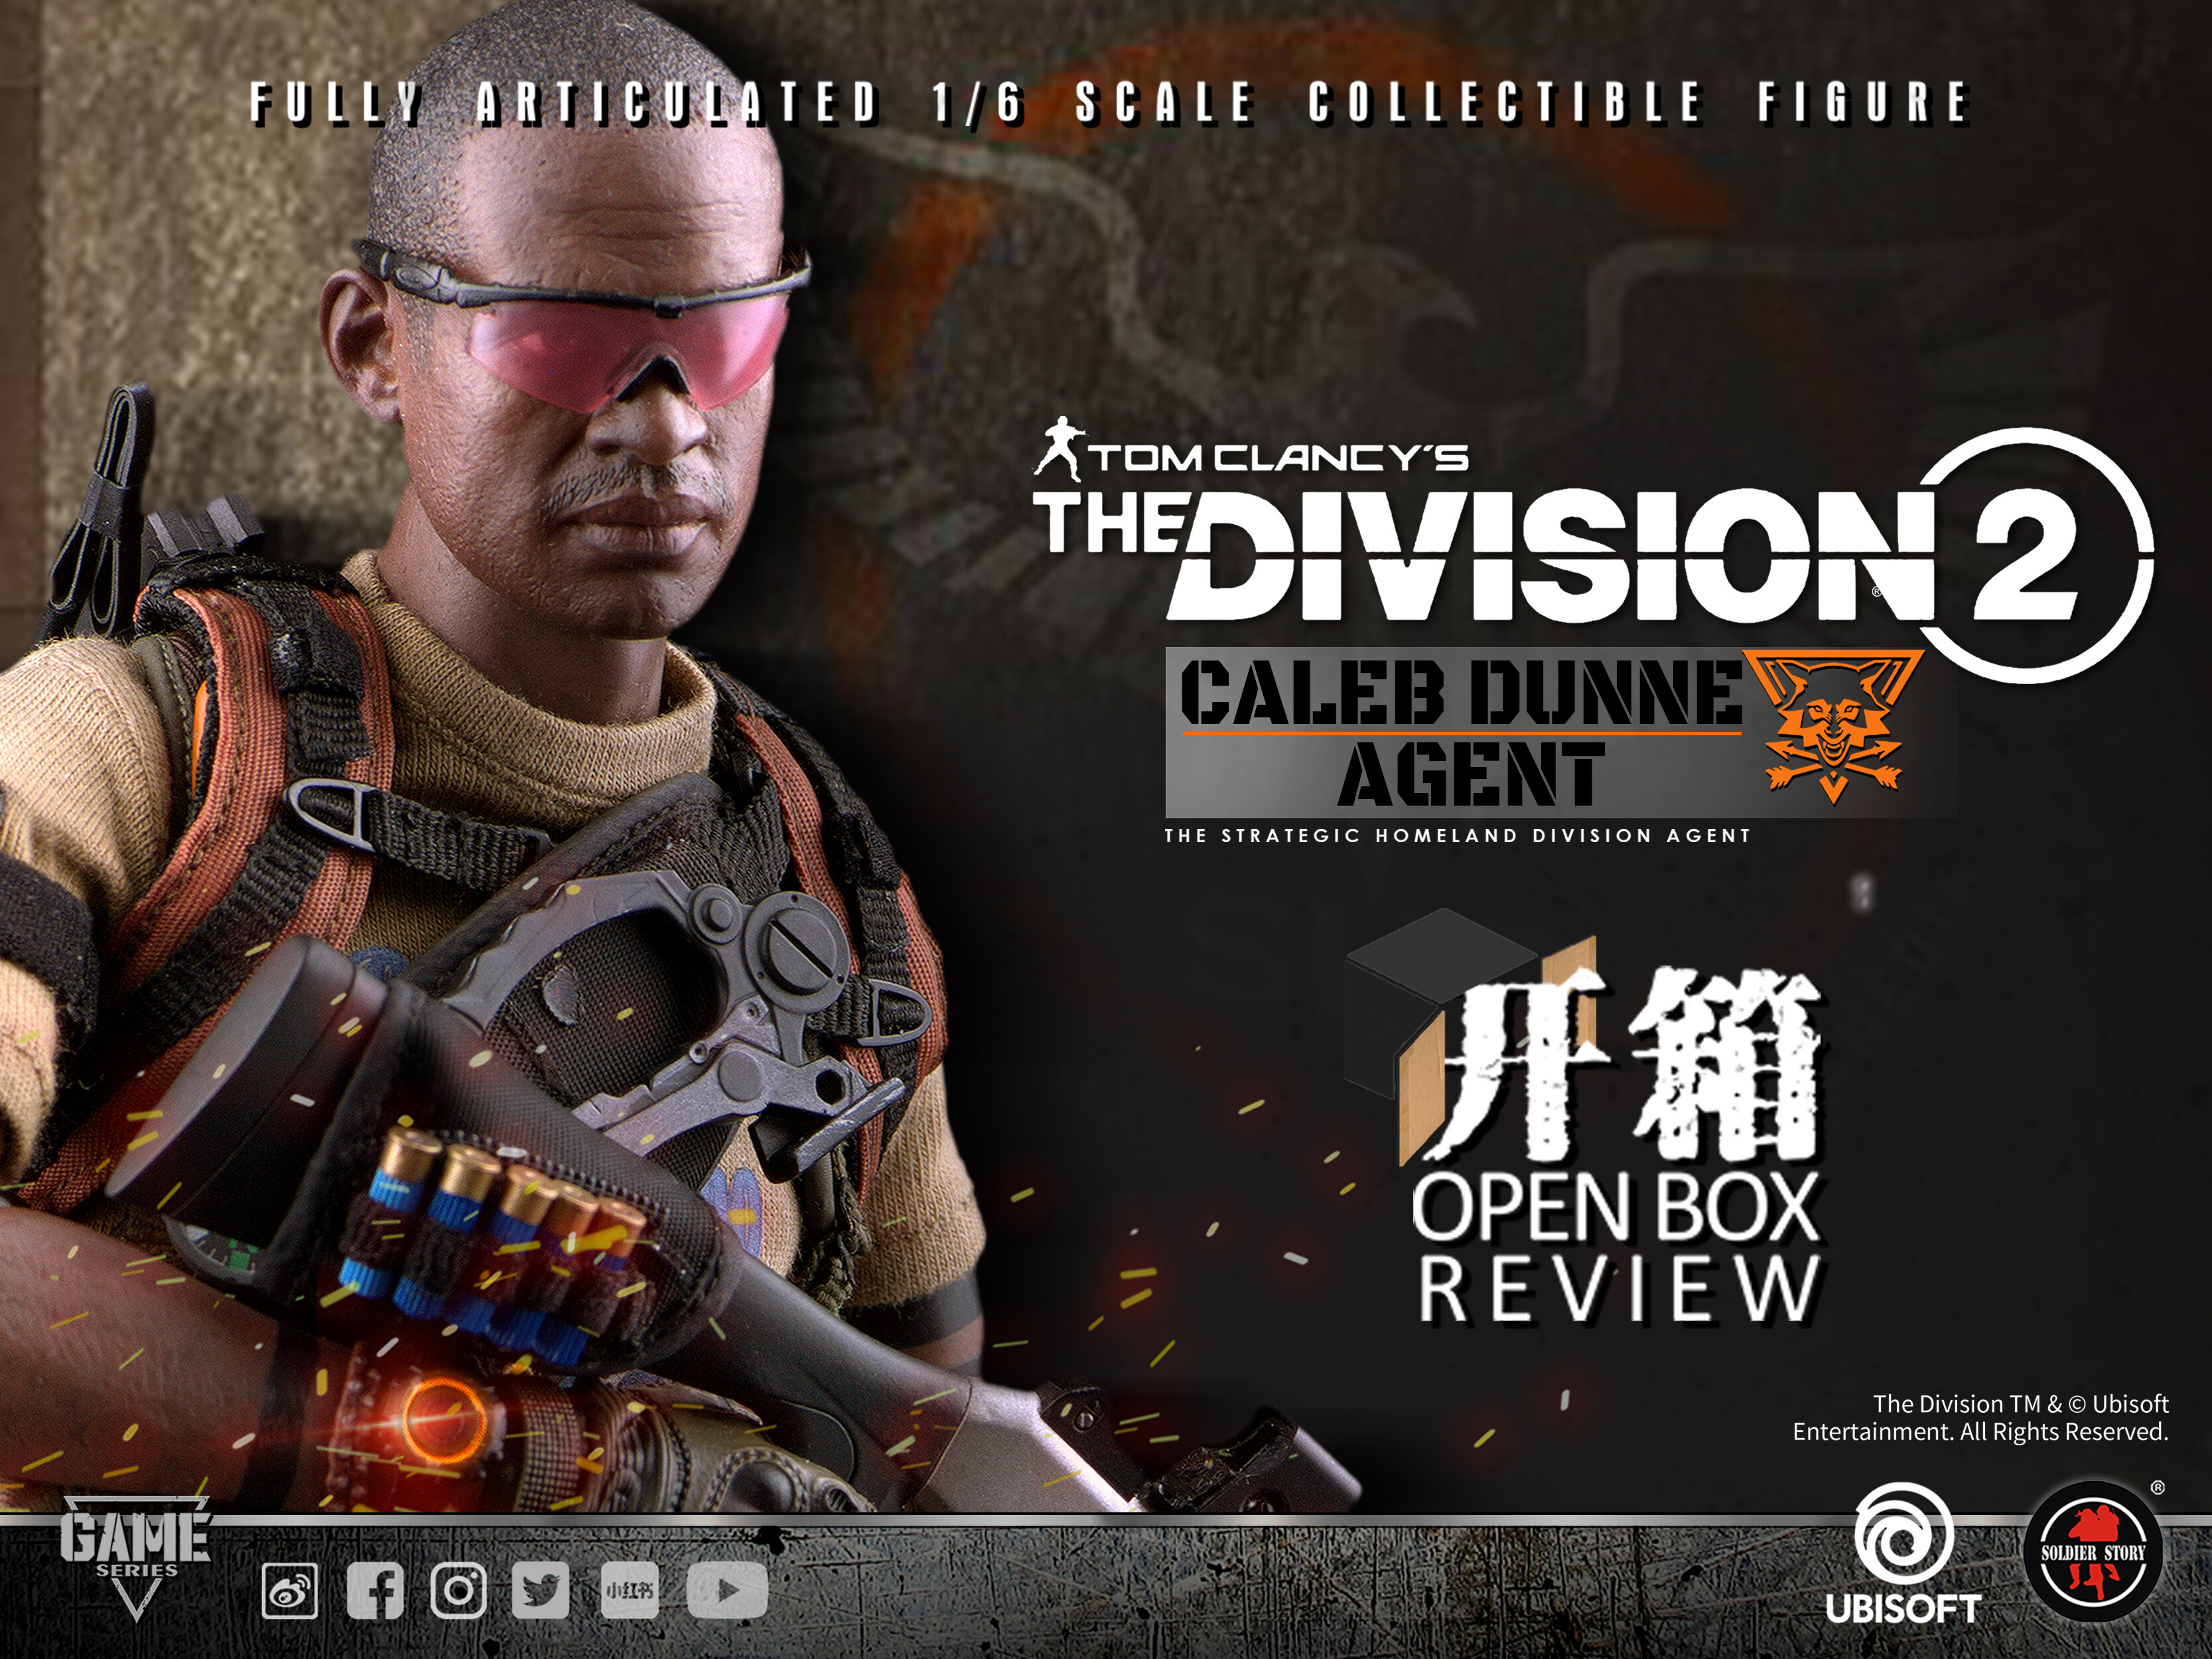 The Division 2 Agent “Caleb Dunne”OPEN-BOX REVIEW